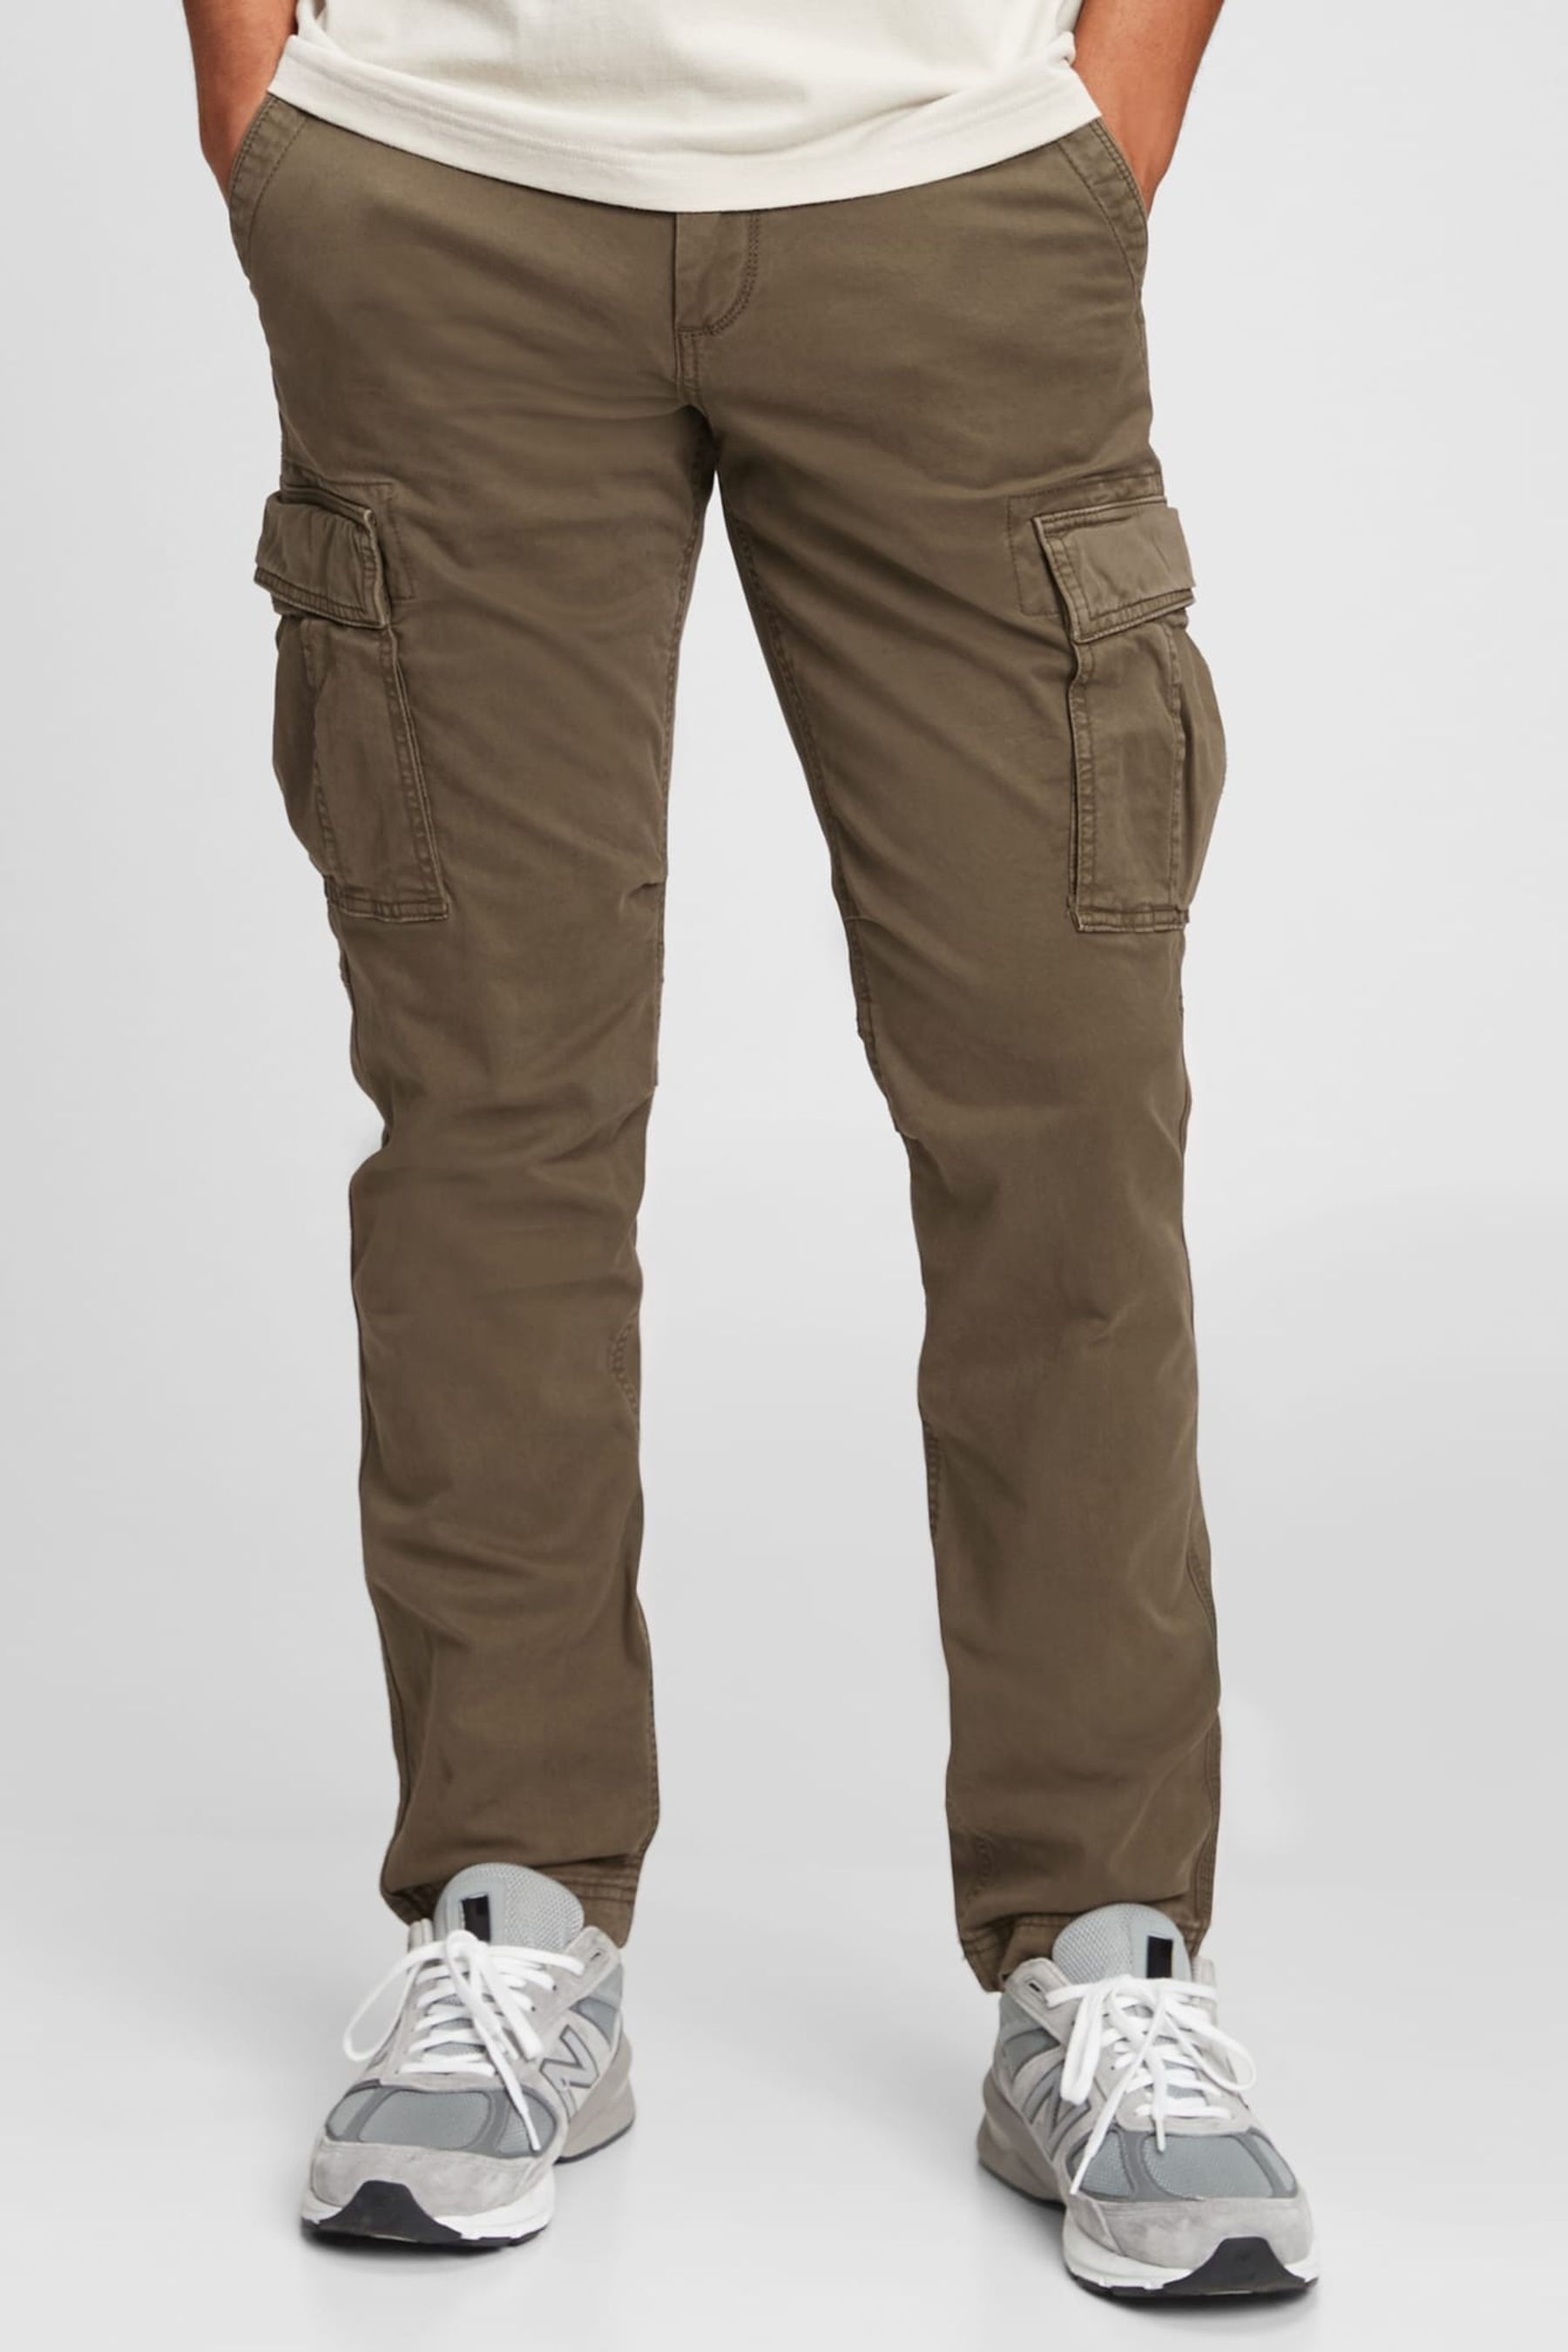 Buy Brown Cargo Trousers from the Gap online shop